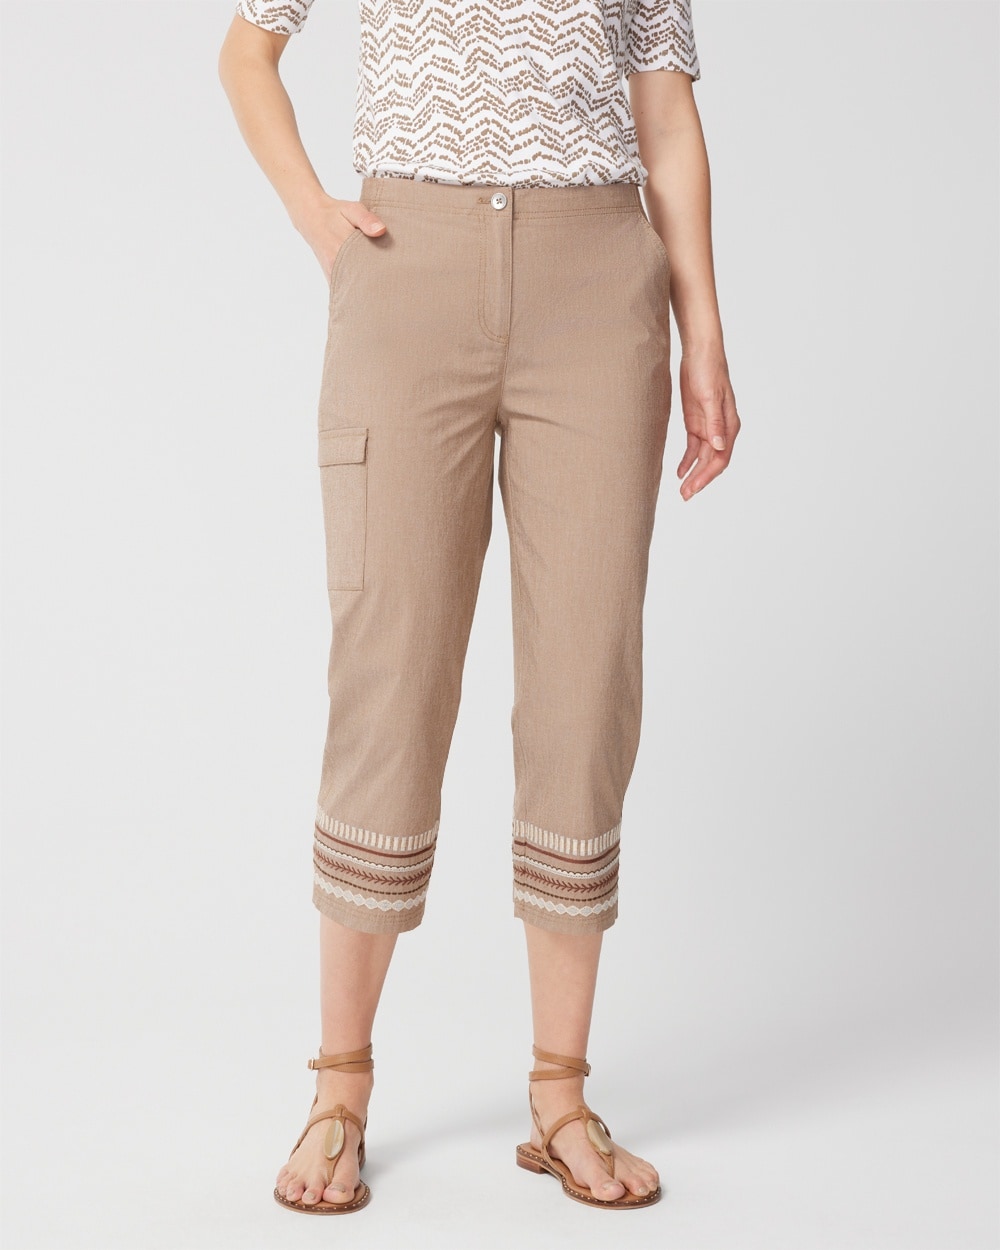 Fitigues Embroidered Cargo Capri Pants